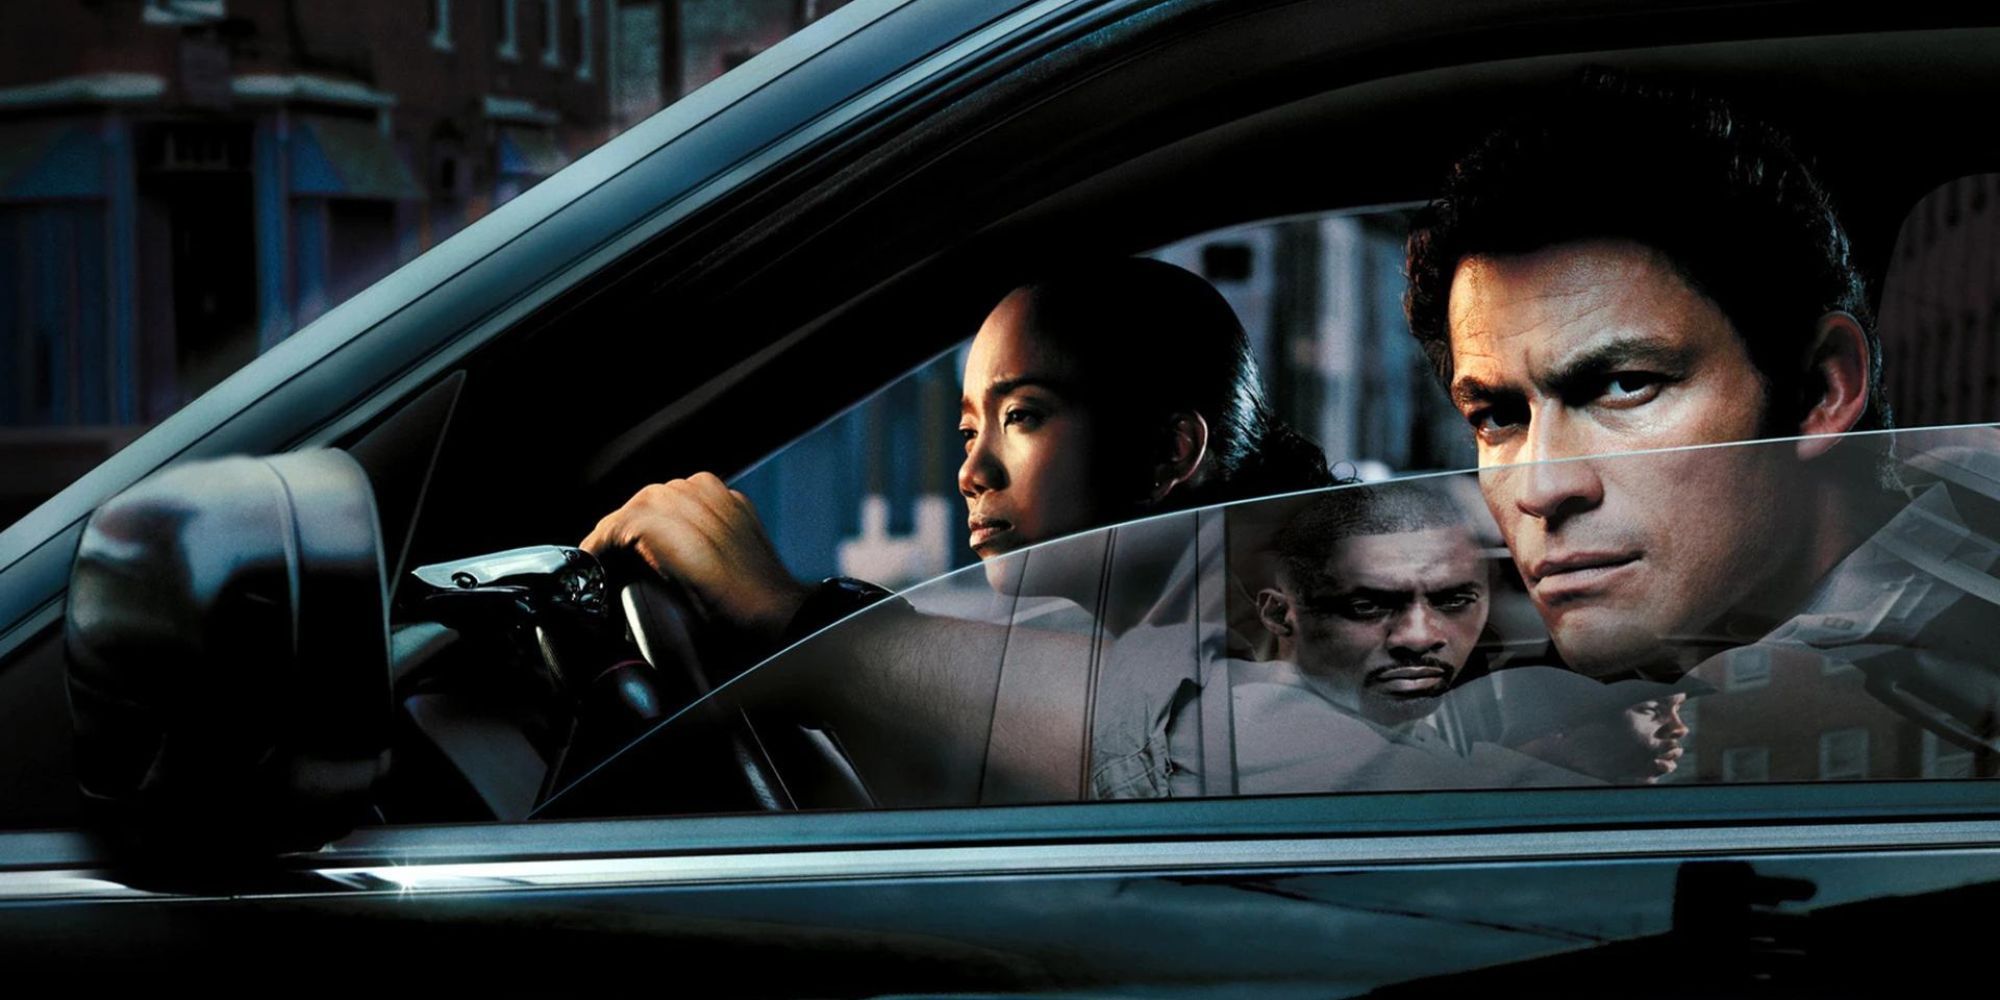 Dominic West as Jimmy McNulty, Sonja Sohn as Kima Greggs, and Idris Elba as Stringer Bell in a promo poster for The Wire.